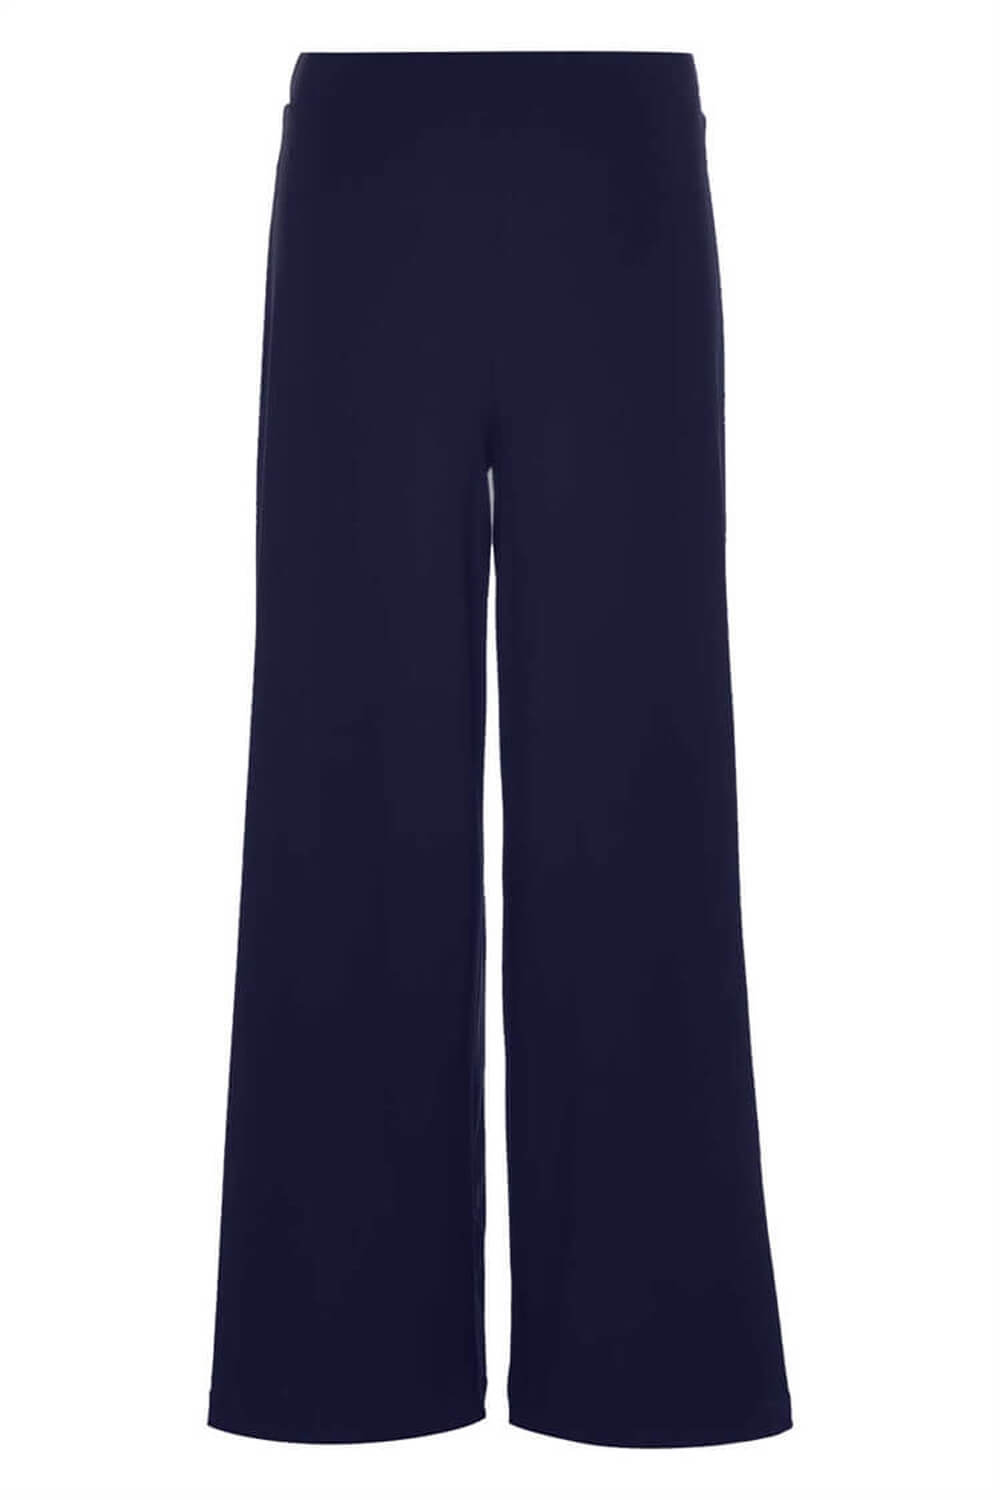 Navy  Wide Leg Trousers, Image 3 of 3